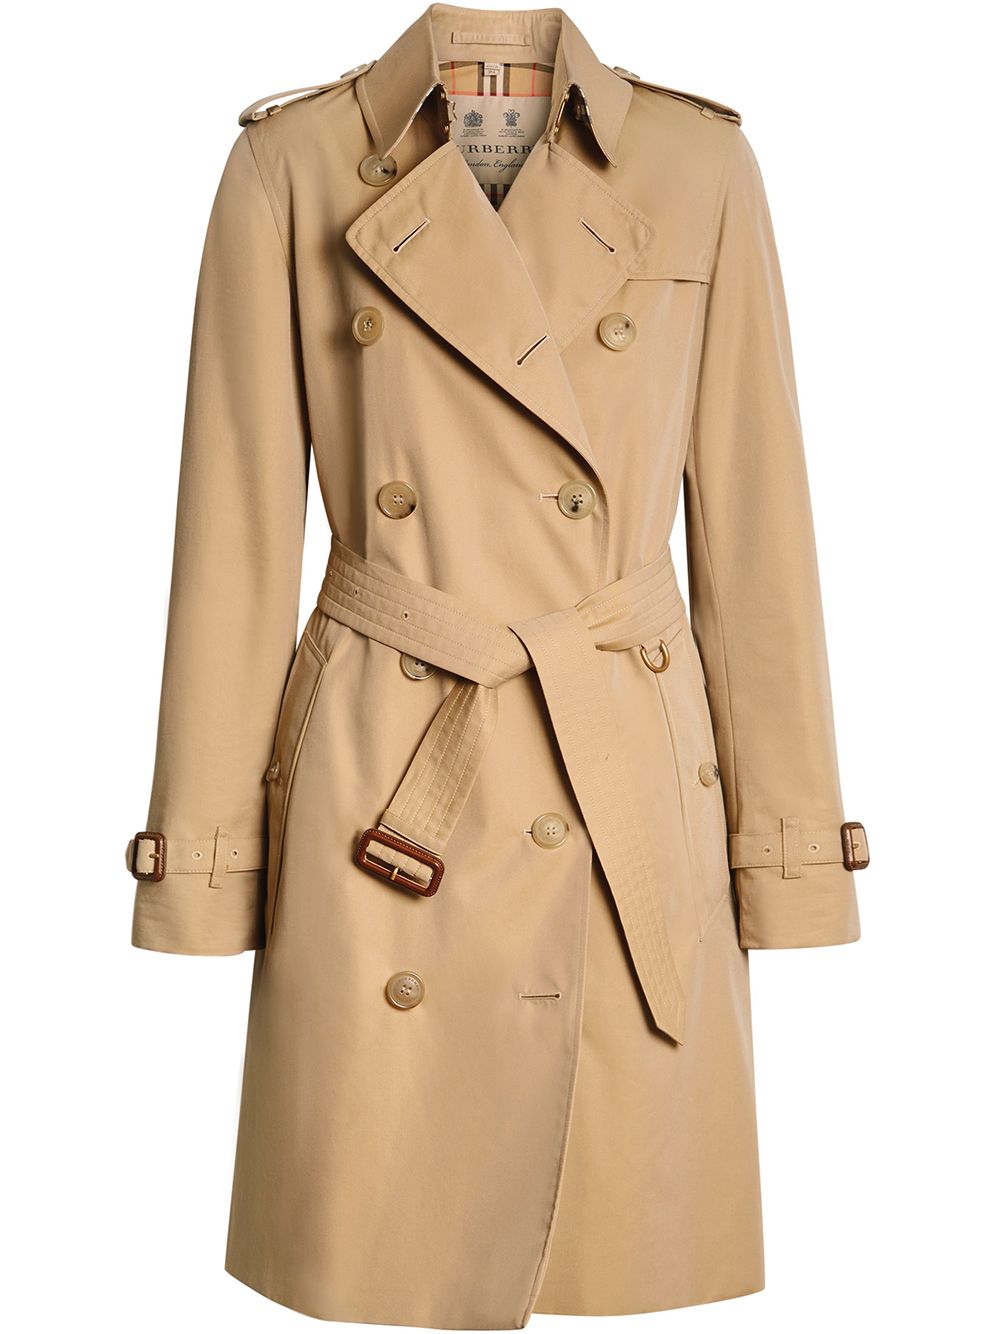 BURBERRY LONDON ENGLAND TRENCH CHECK COAT